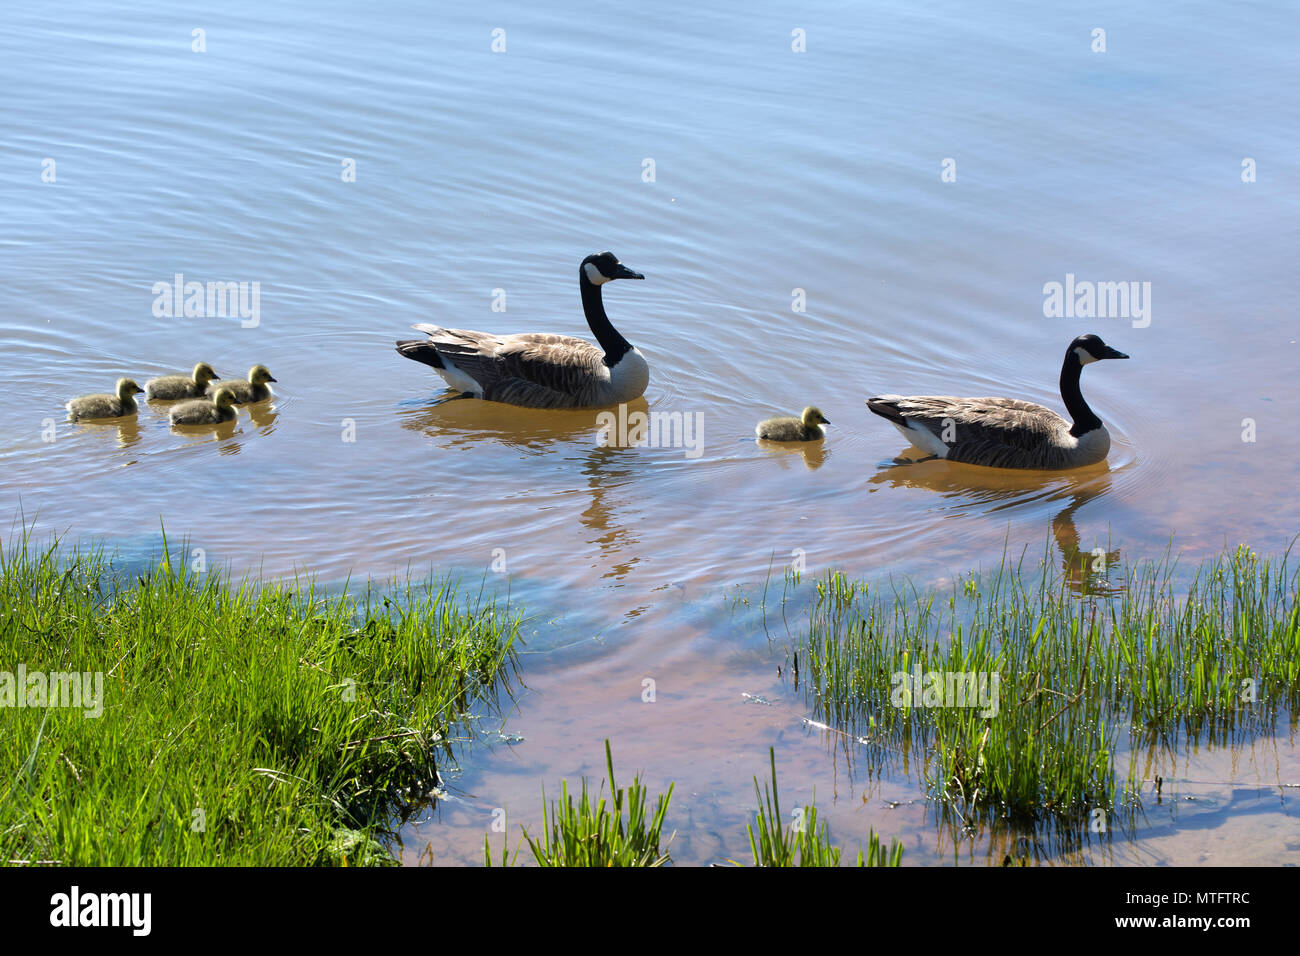 A Canada Goose family in a cove in Orleans, Massachusetts, on Cape Cod Stock Photo